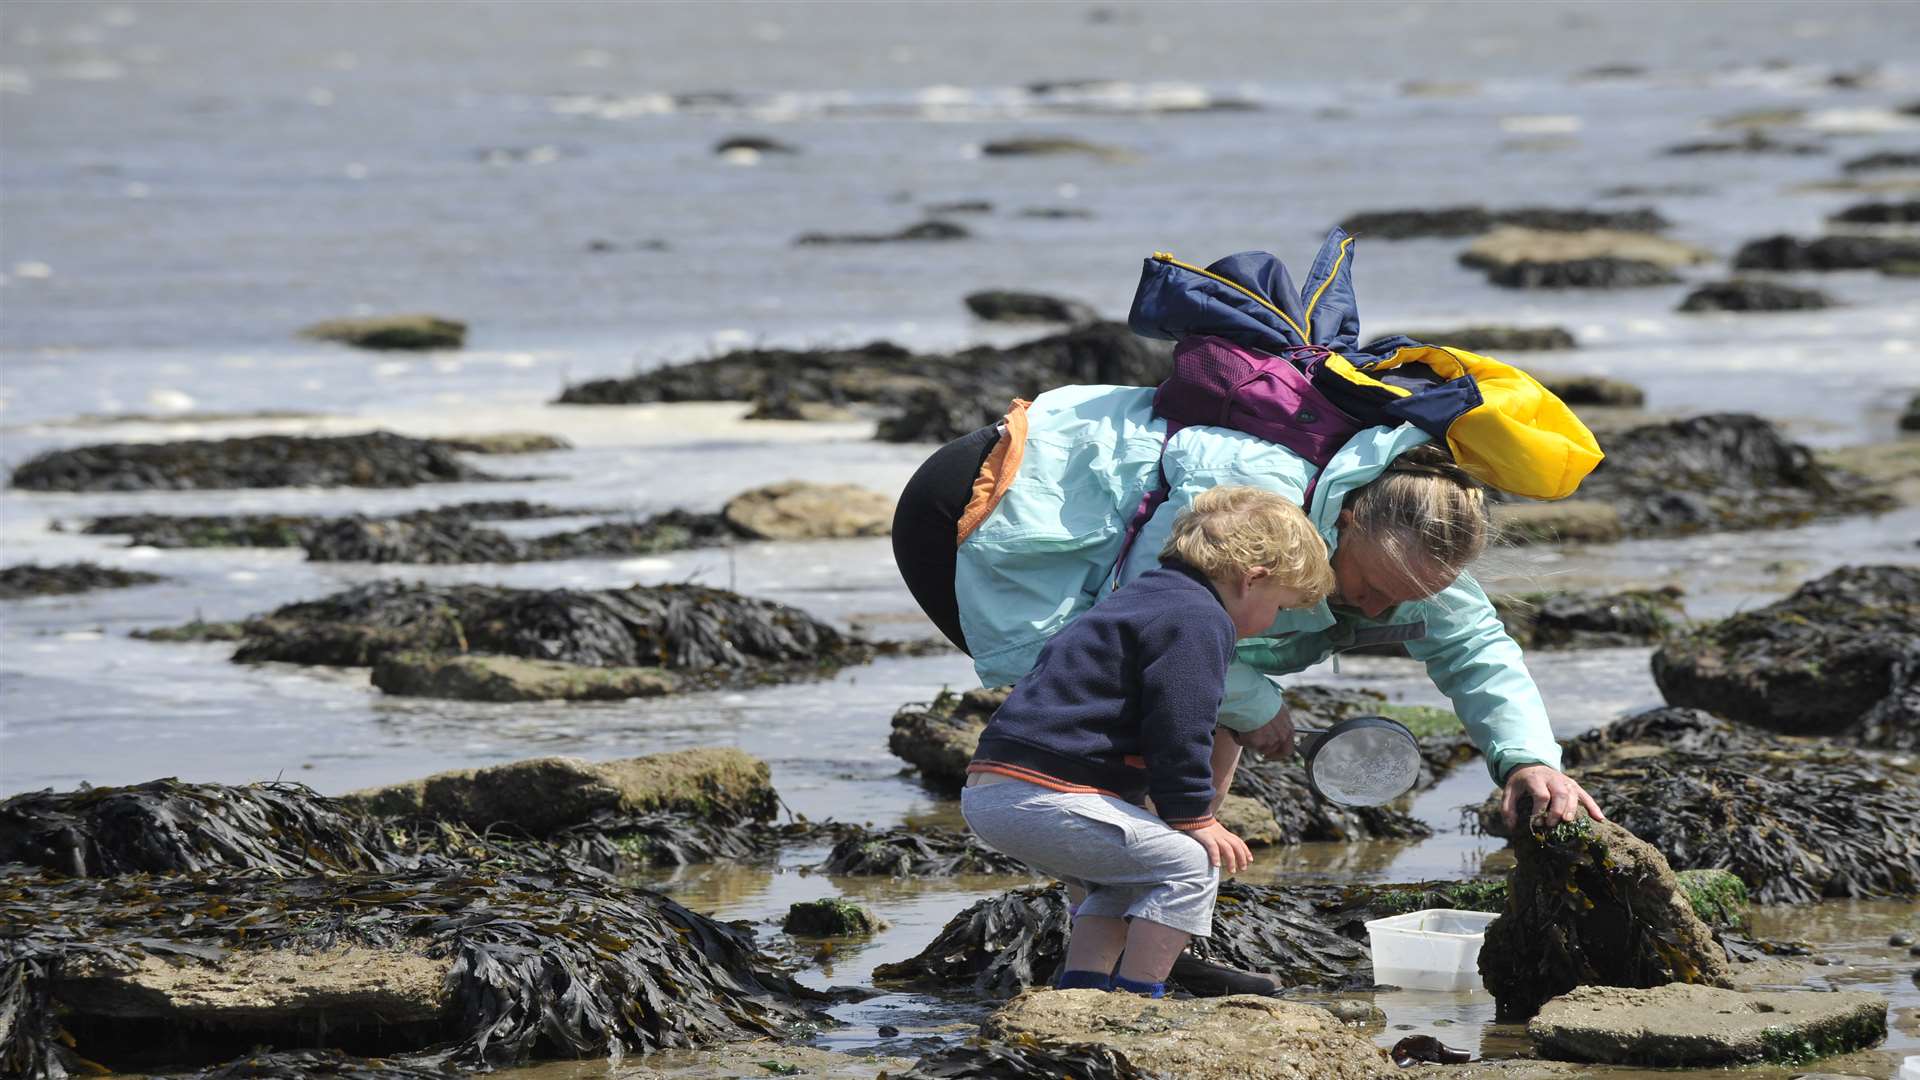 There's rock pooling at St Margaret’s Bay on Tuesday, August 2